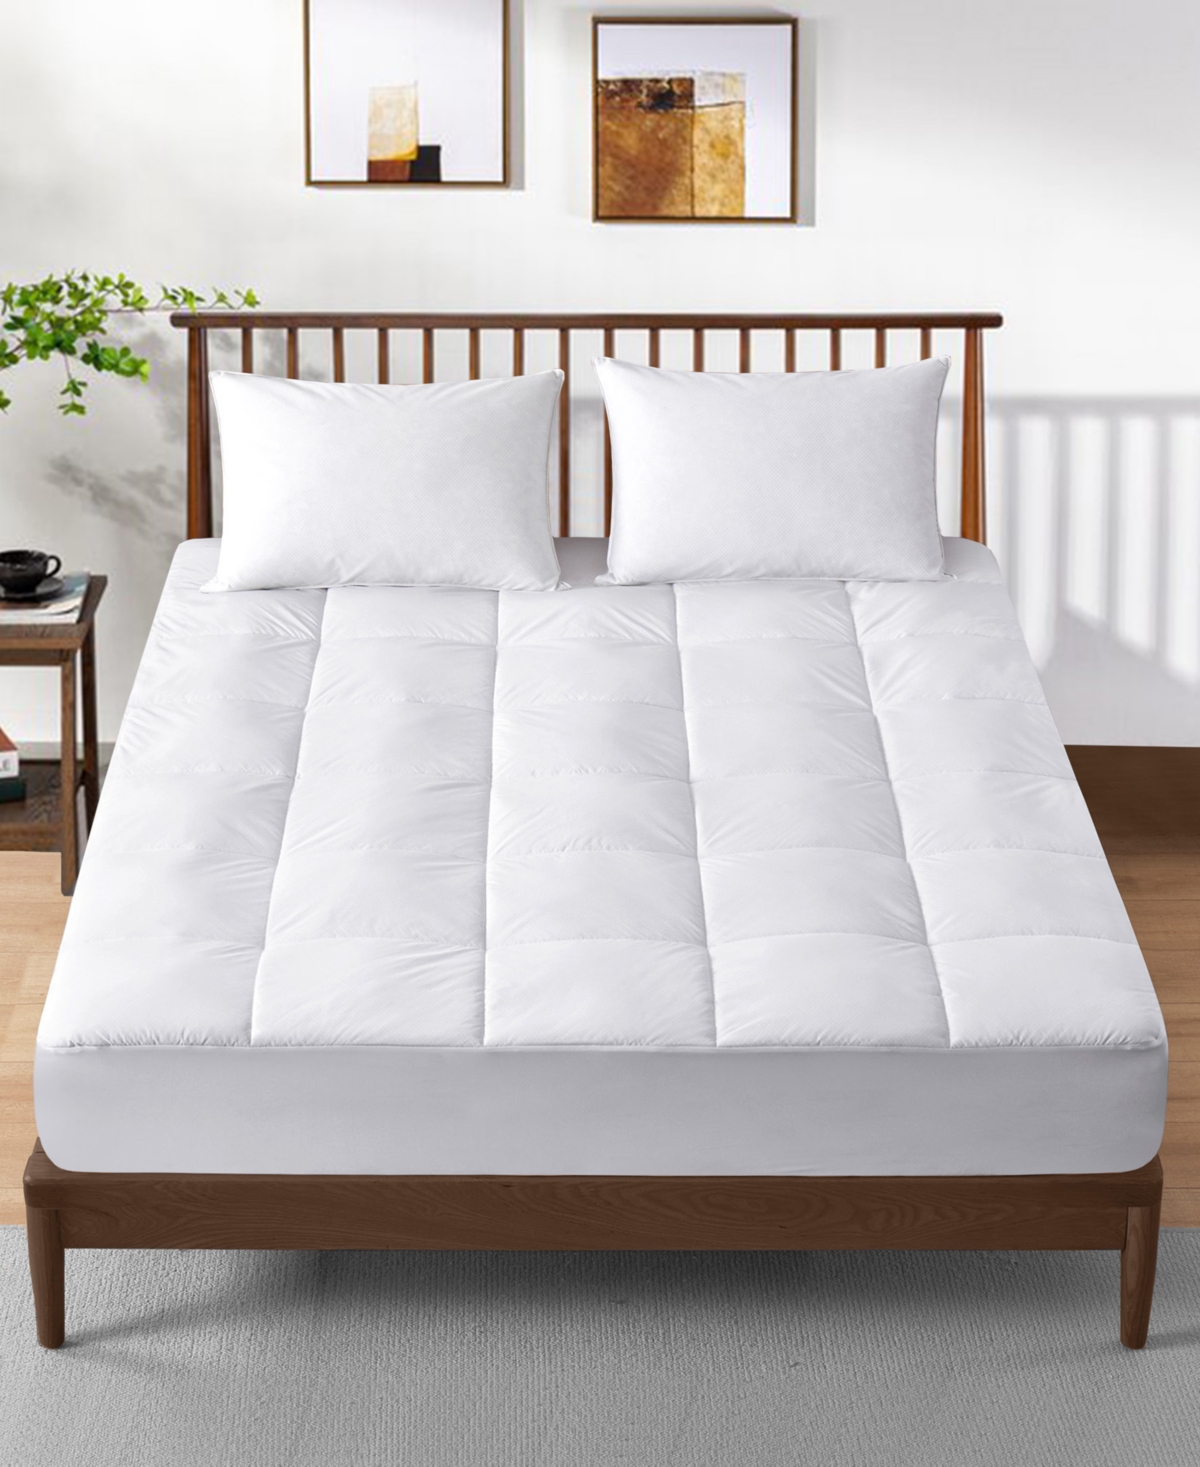 Shop Unikome Phase Change Material Technology Cooling Mattress Pad, Queen In White